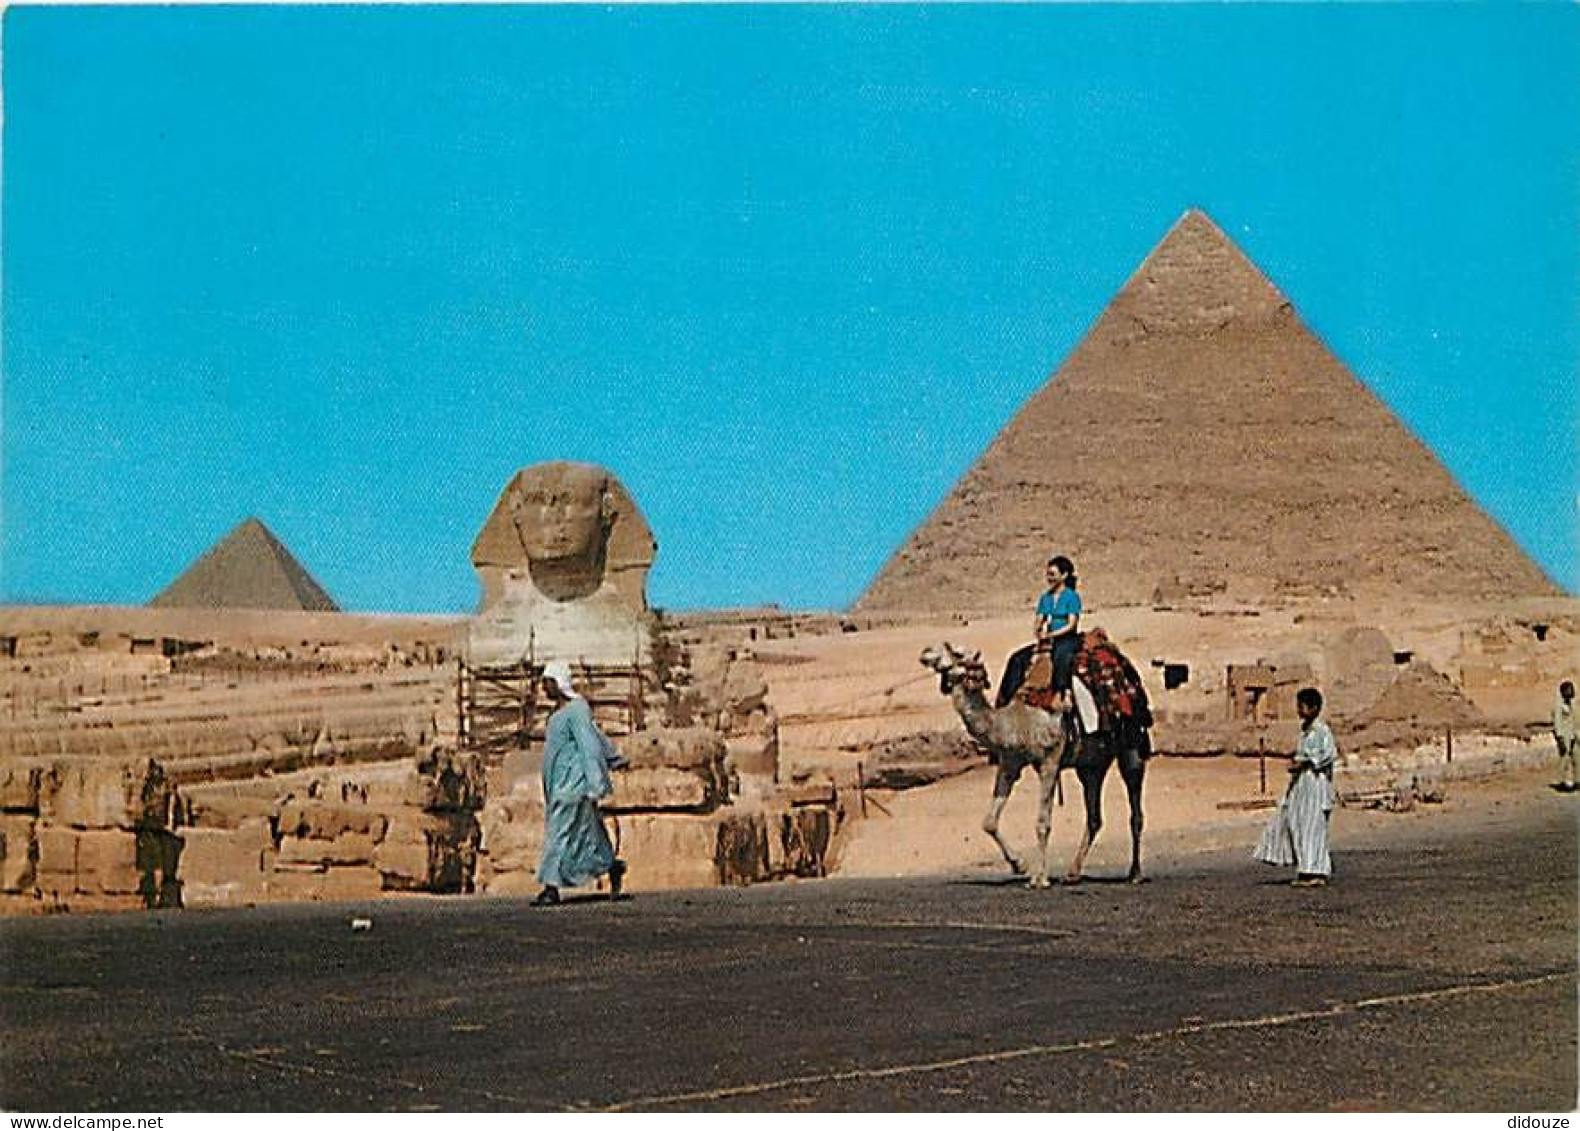 Egypte - Gizeh - Giza - The Great Sphinx And Kheireh Pyramid - Les Pyramides Et Le Sphinx - Chamelier - Chameaux - Carte - Guiza